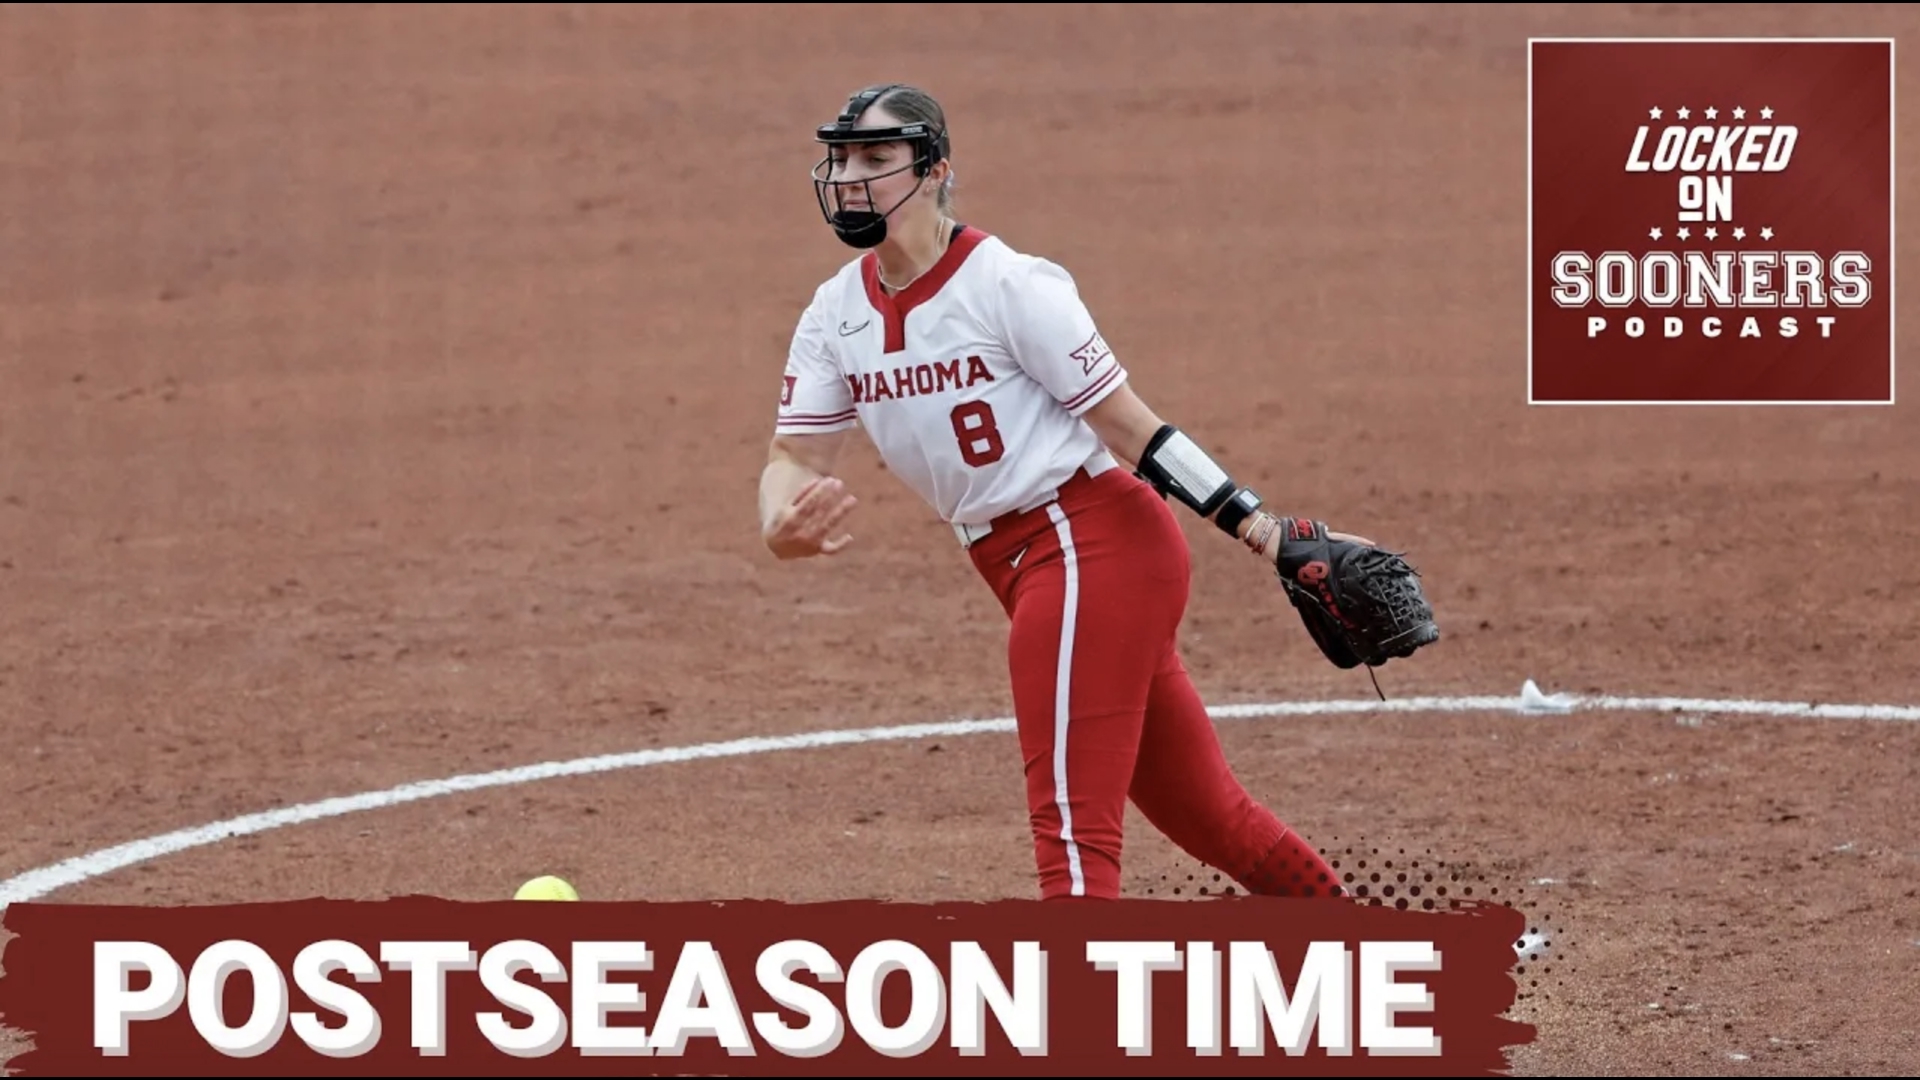 Alex Storako joins the show to breakdown what went down in Bedlam as the Sooners dropped their second series of the season and finished the Big 12 regular season